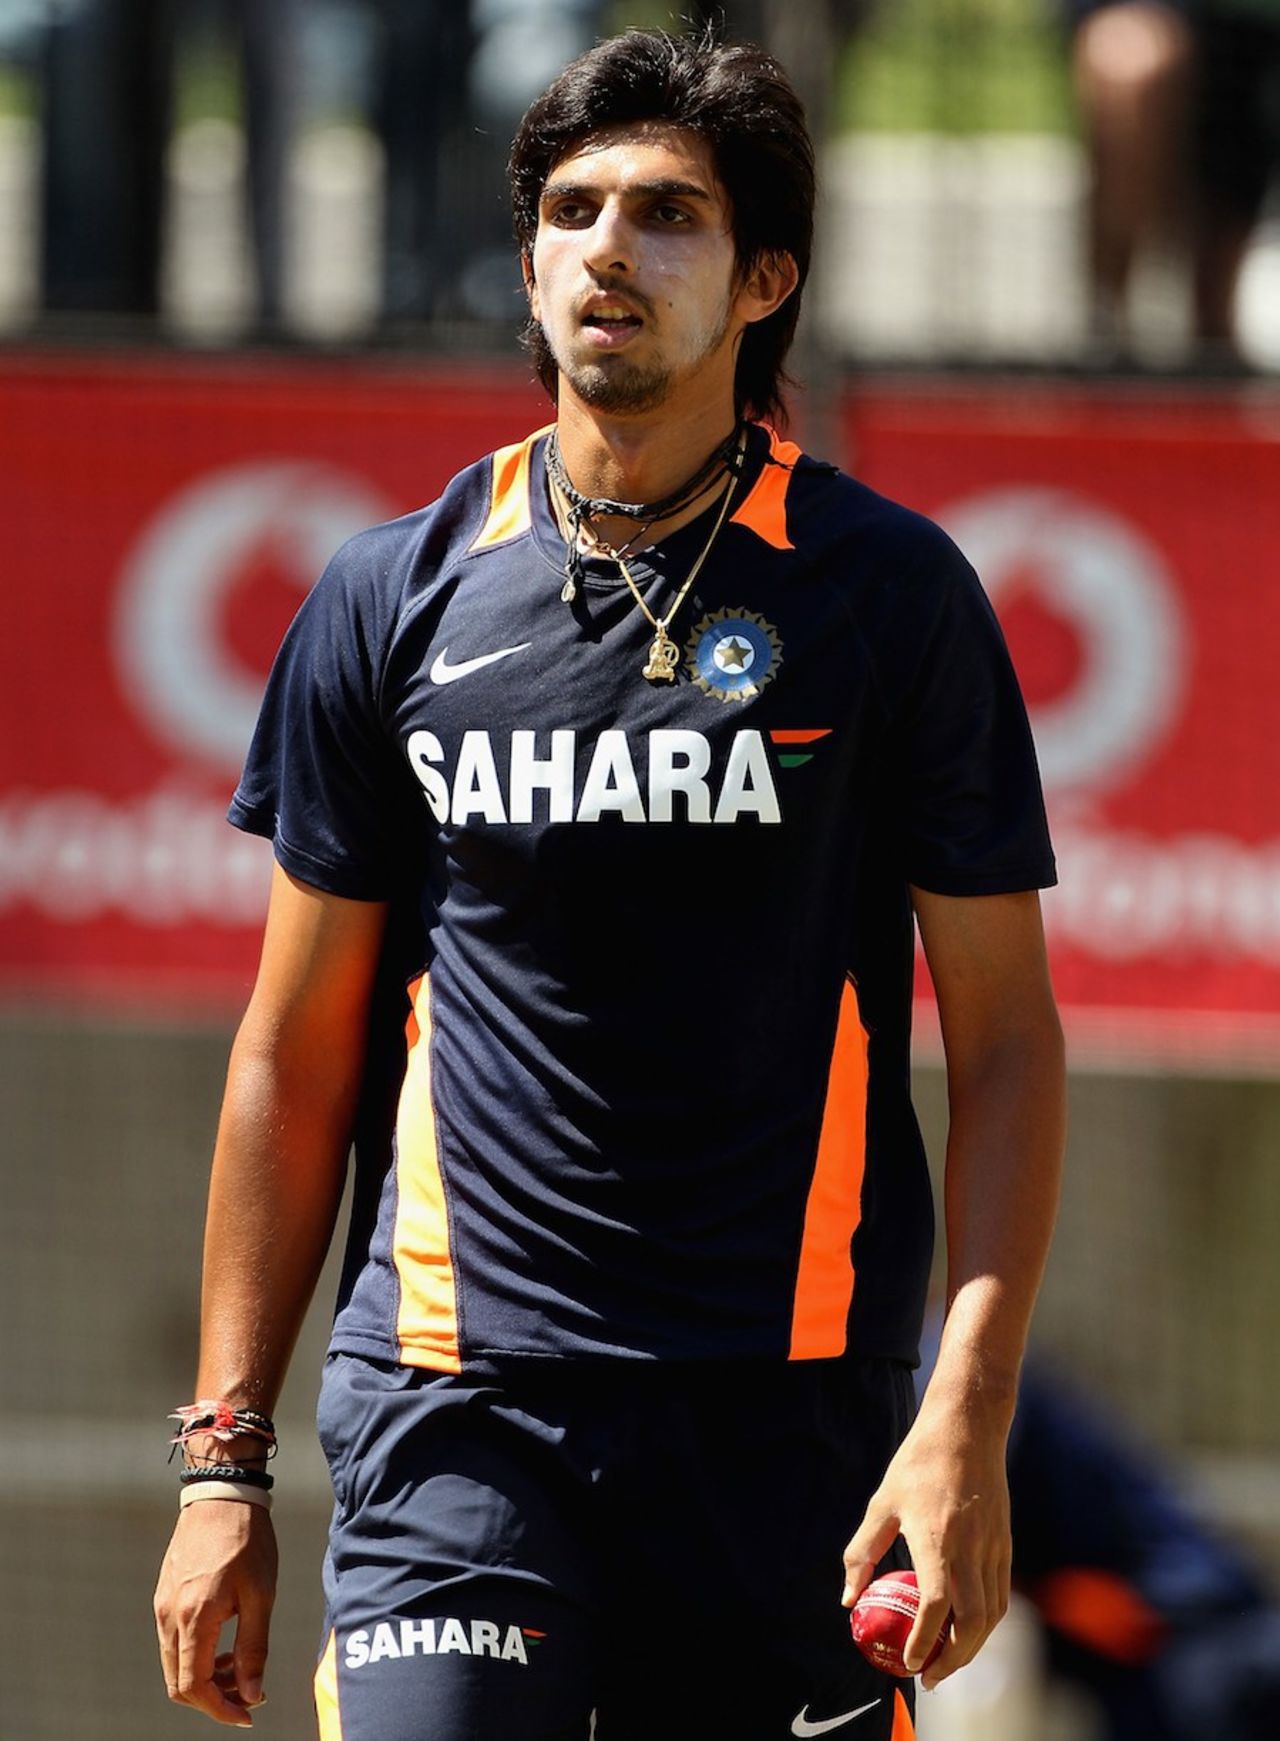 Ishant Sharma, whose ankle is a concern, bowled in the nets, Melbourne, December 23, 2011